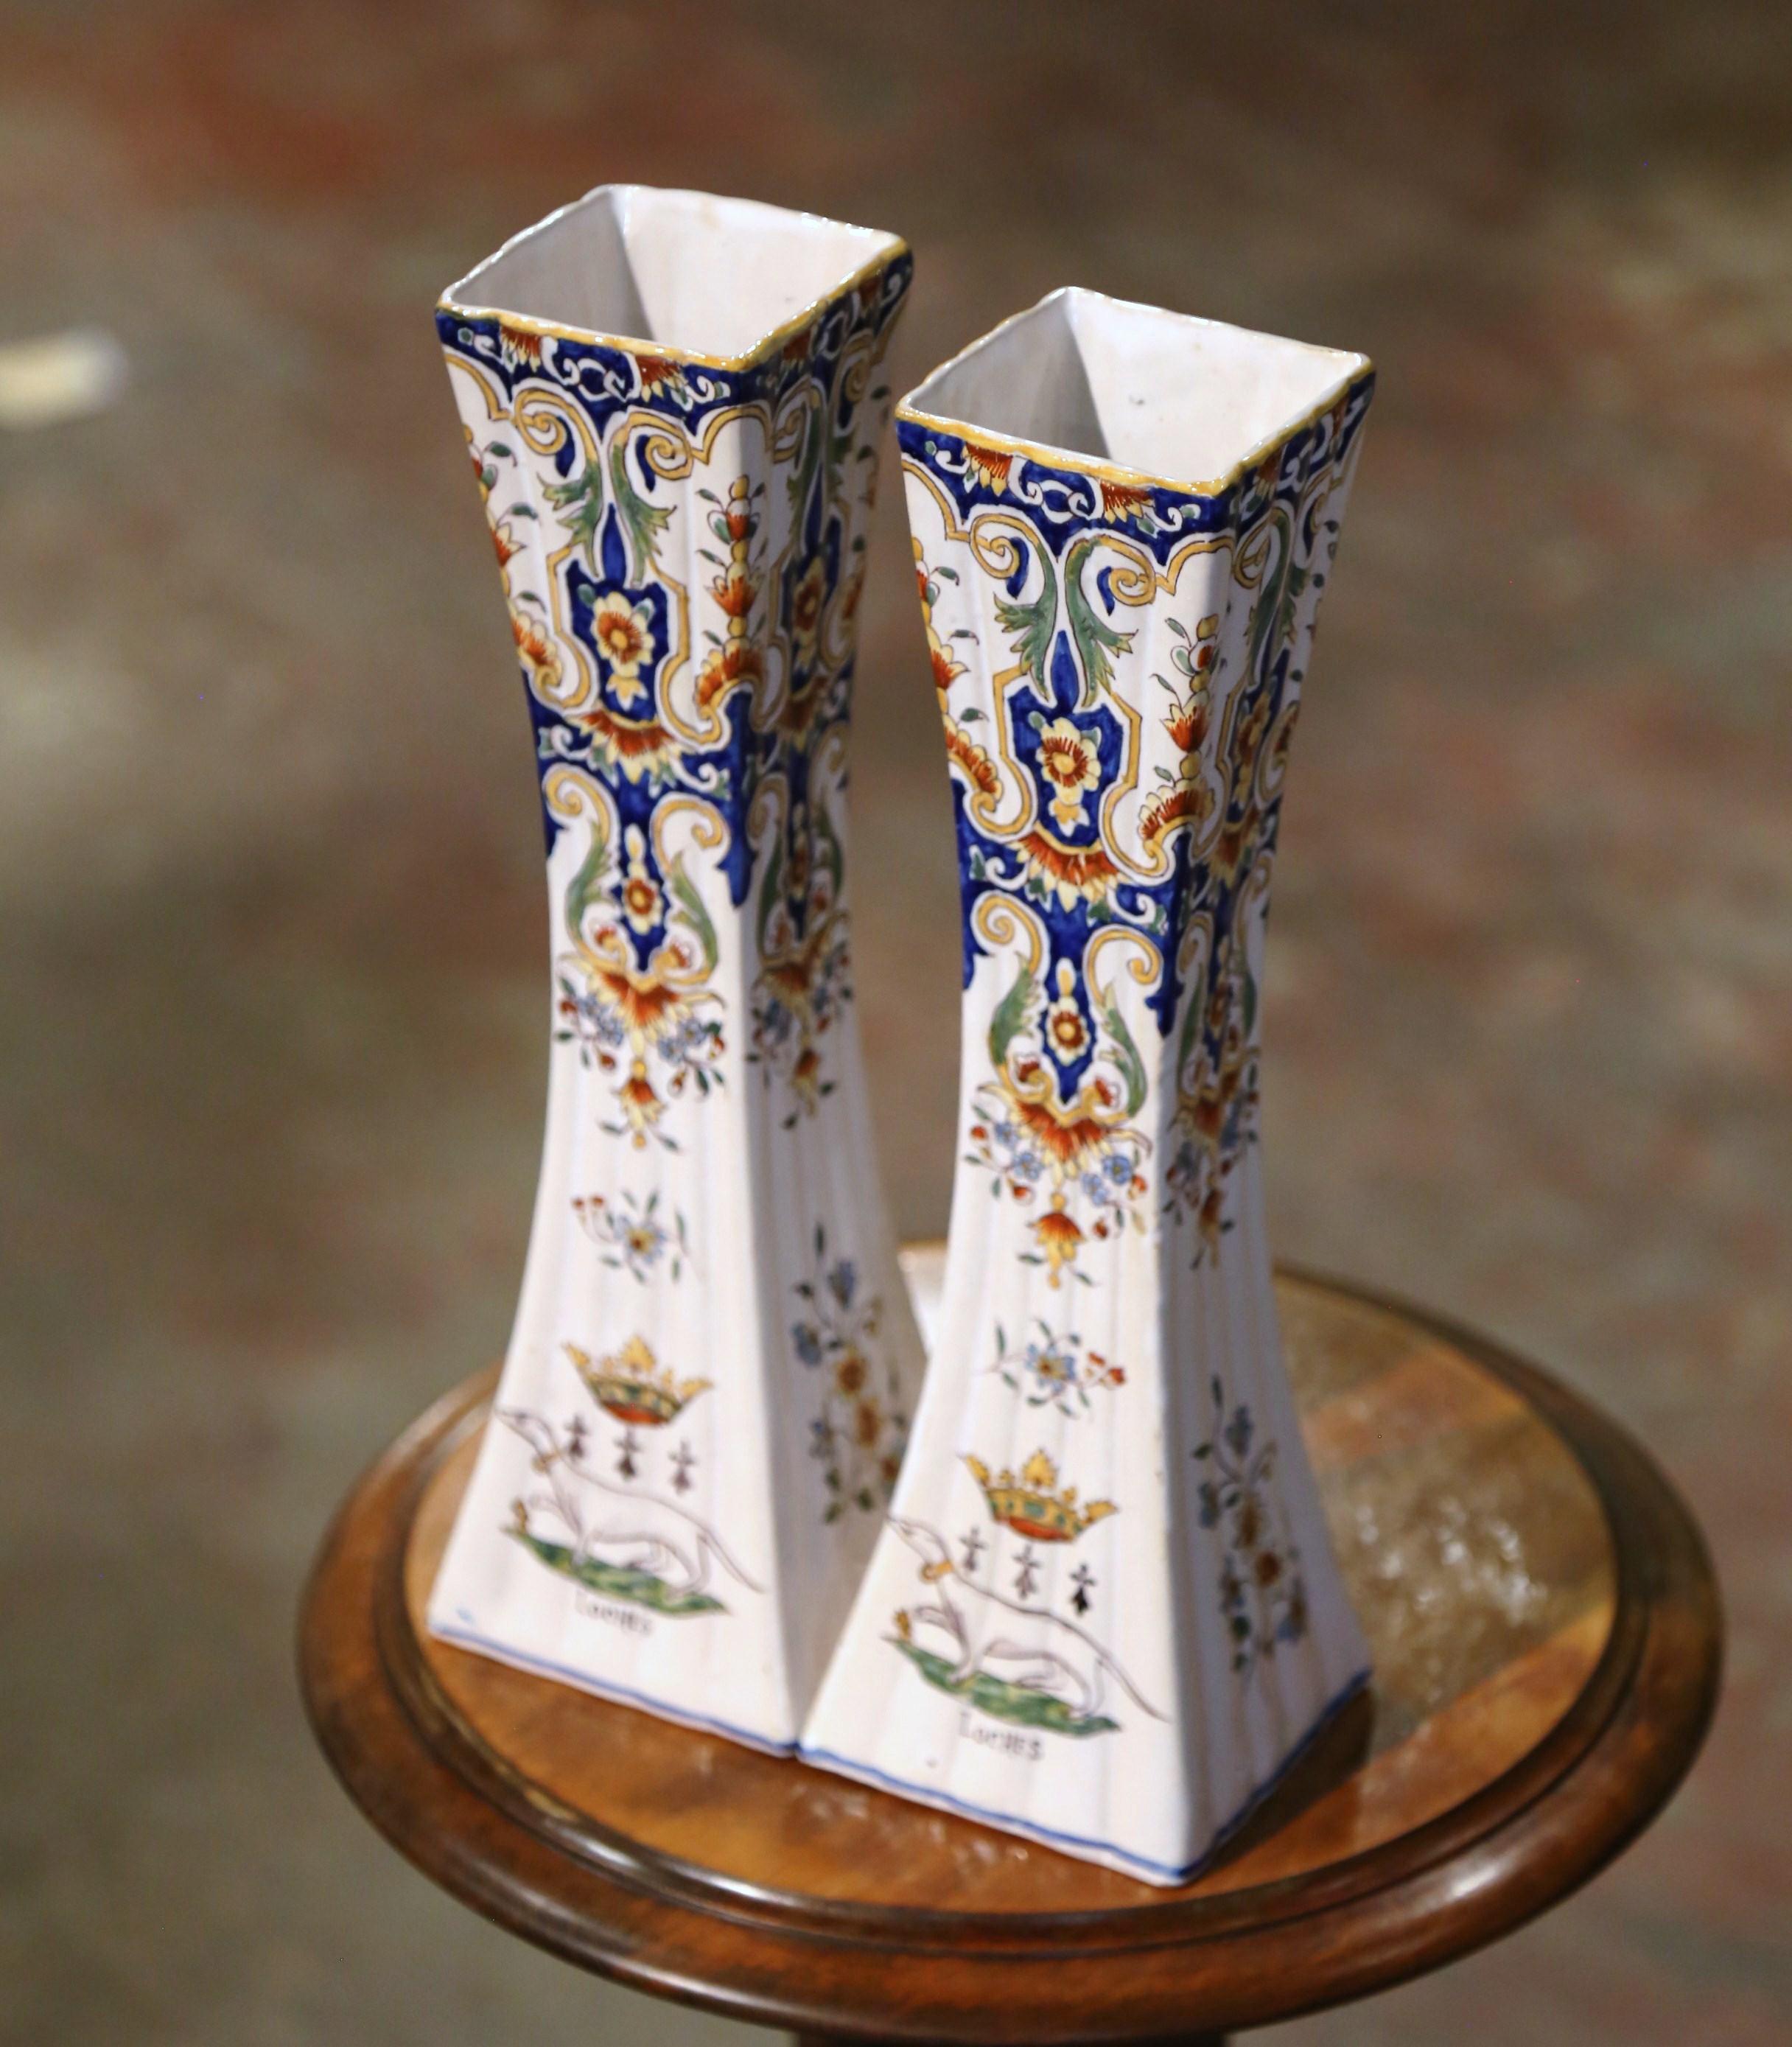 Incorporate beautiful colors into your home with this elegant pair of antique ceramic trumpet vases. Crafted In Normandy circa 1899, each vessel is ornate in decoration yet simple in shape; the tall, colorful vase features a square bottom and a wide